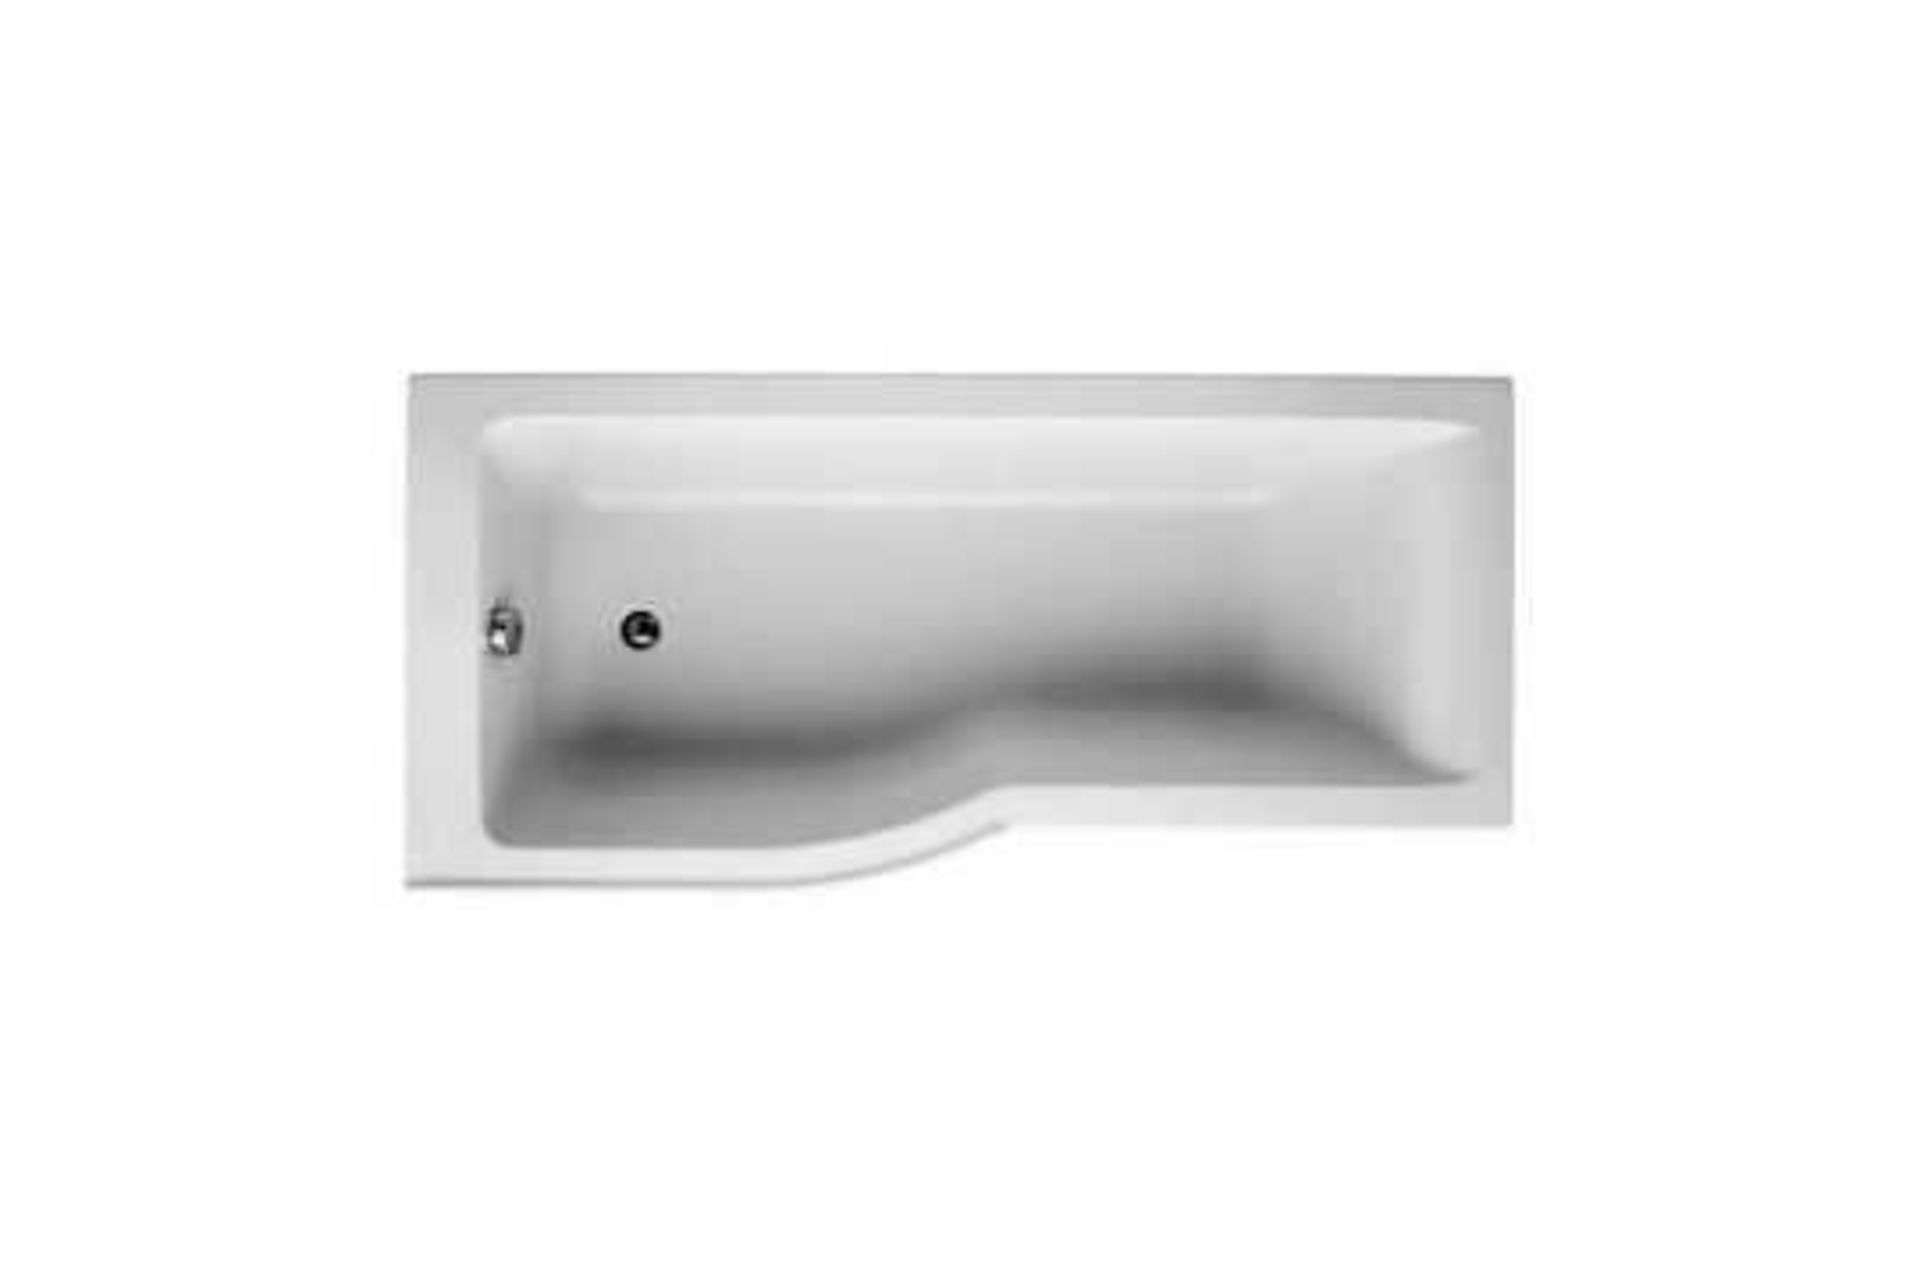 (Jm) RRP £520 Lot To Contain 2 X Unpackaged Ideal Standard Concept Air P Shaped Showers And Baths - Image 2 of 5